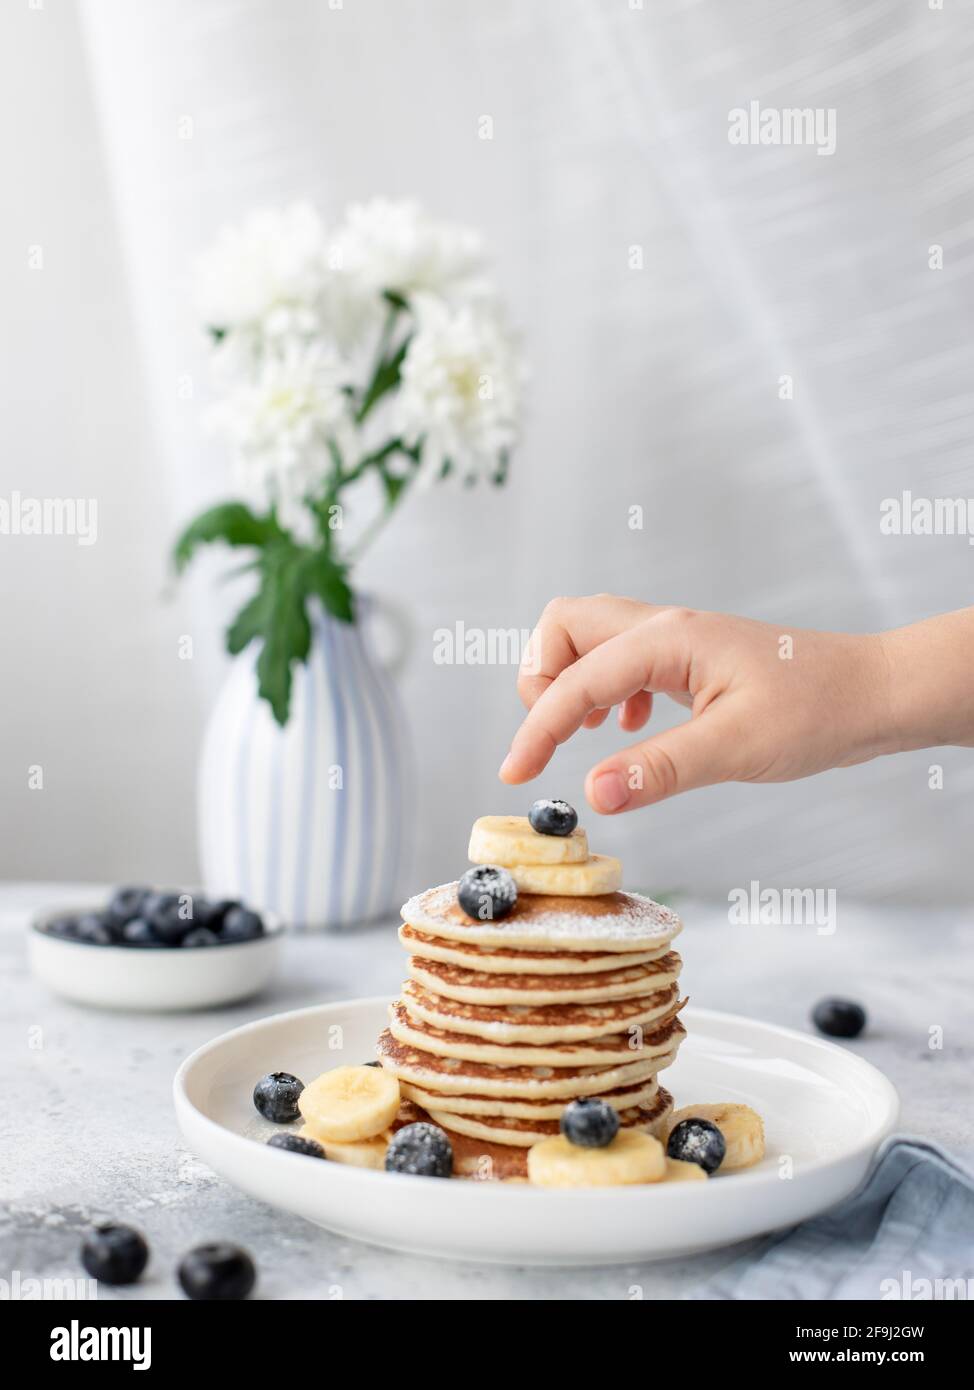 childrens hand and stack of pancakes with berries. delicious homemade breakfast. vertical image Stock Photo